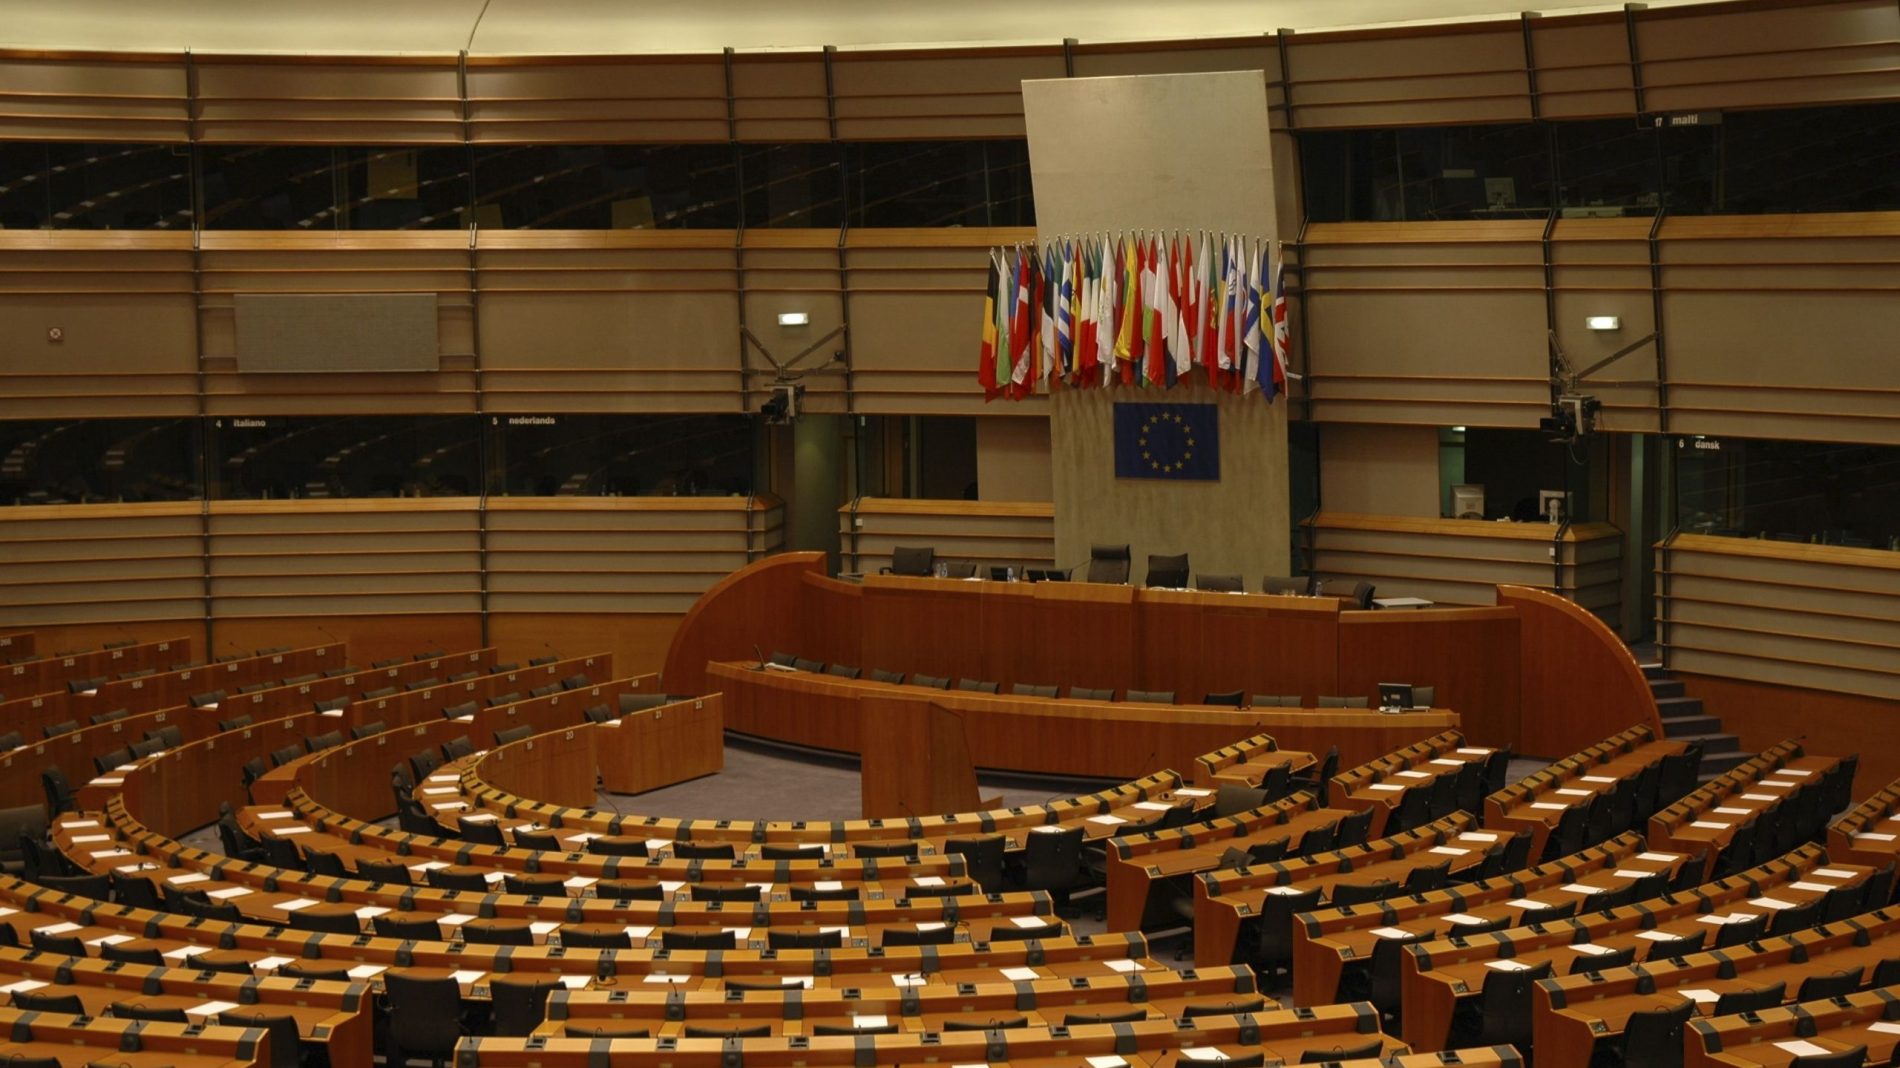 the hemicycle of the european parliament